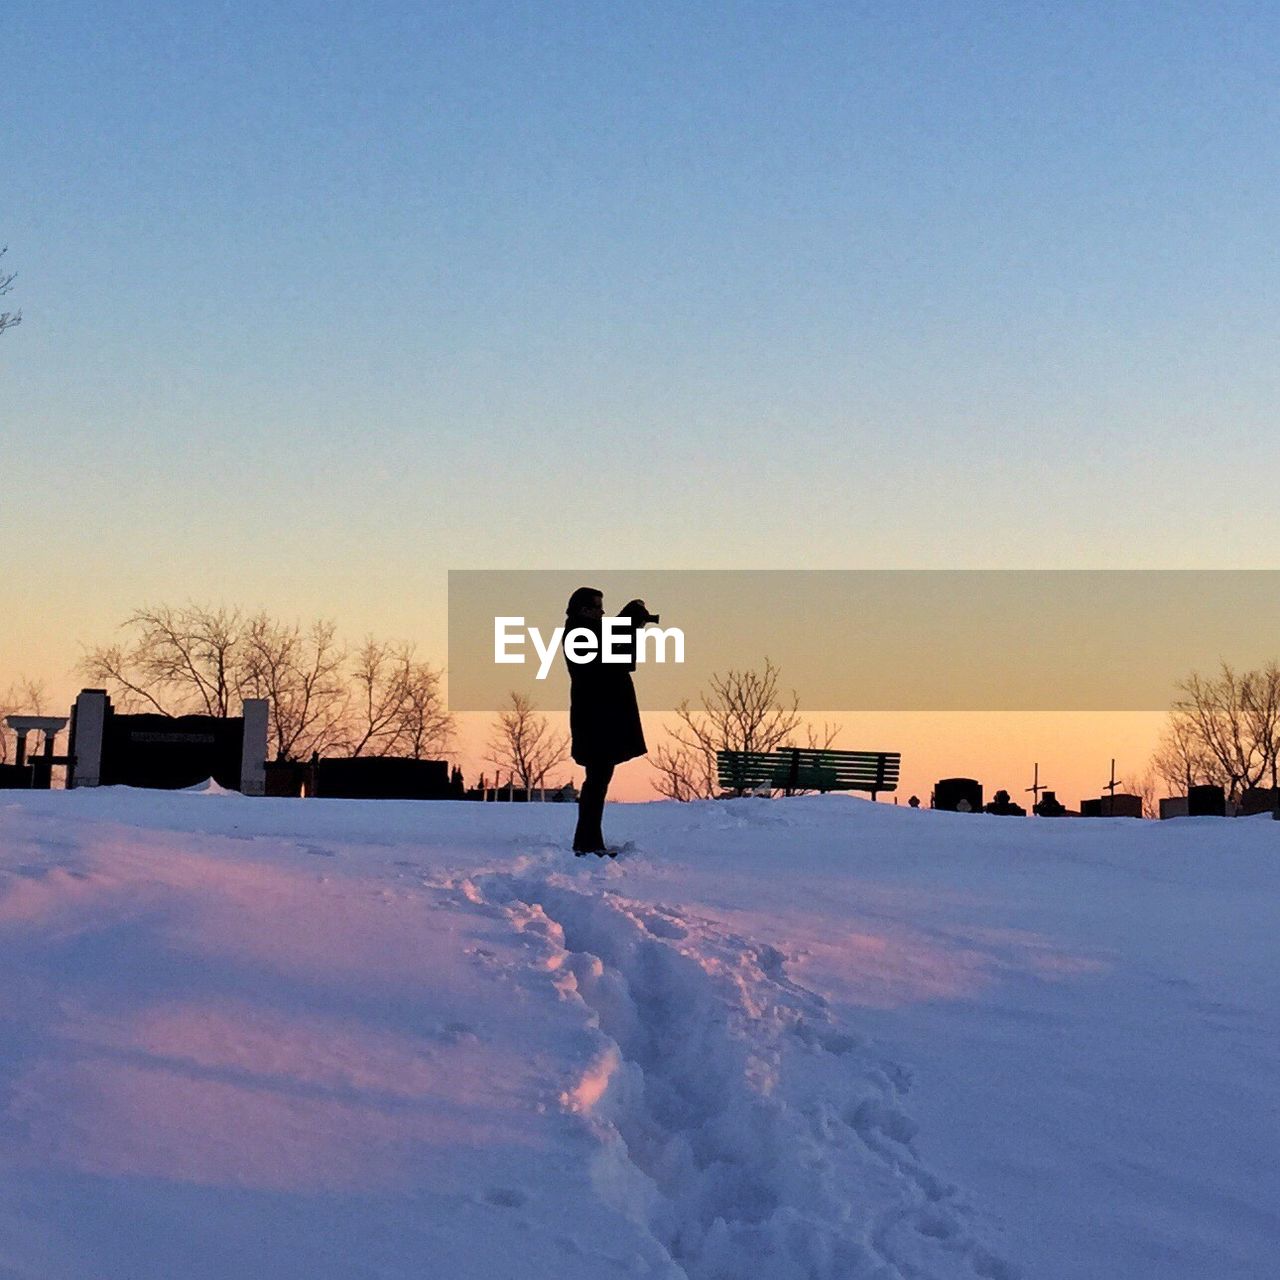 SILHOUETTE OF PERSON STANDING ON SNOW